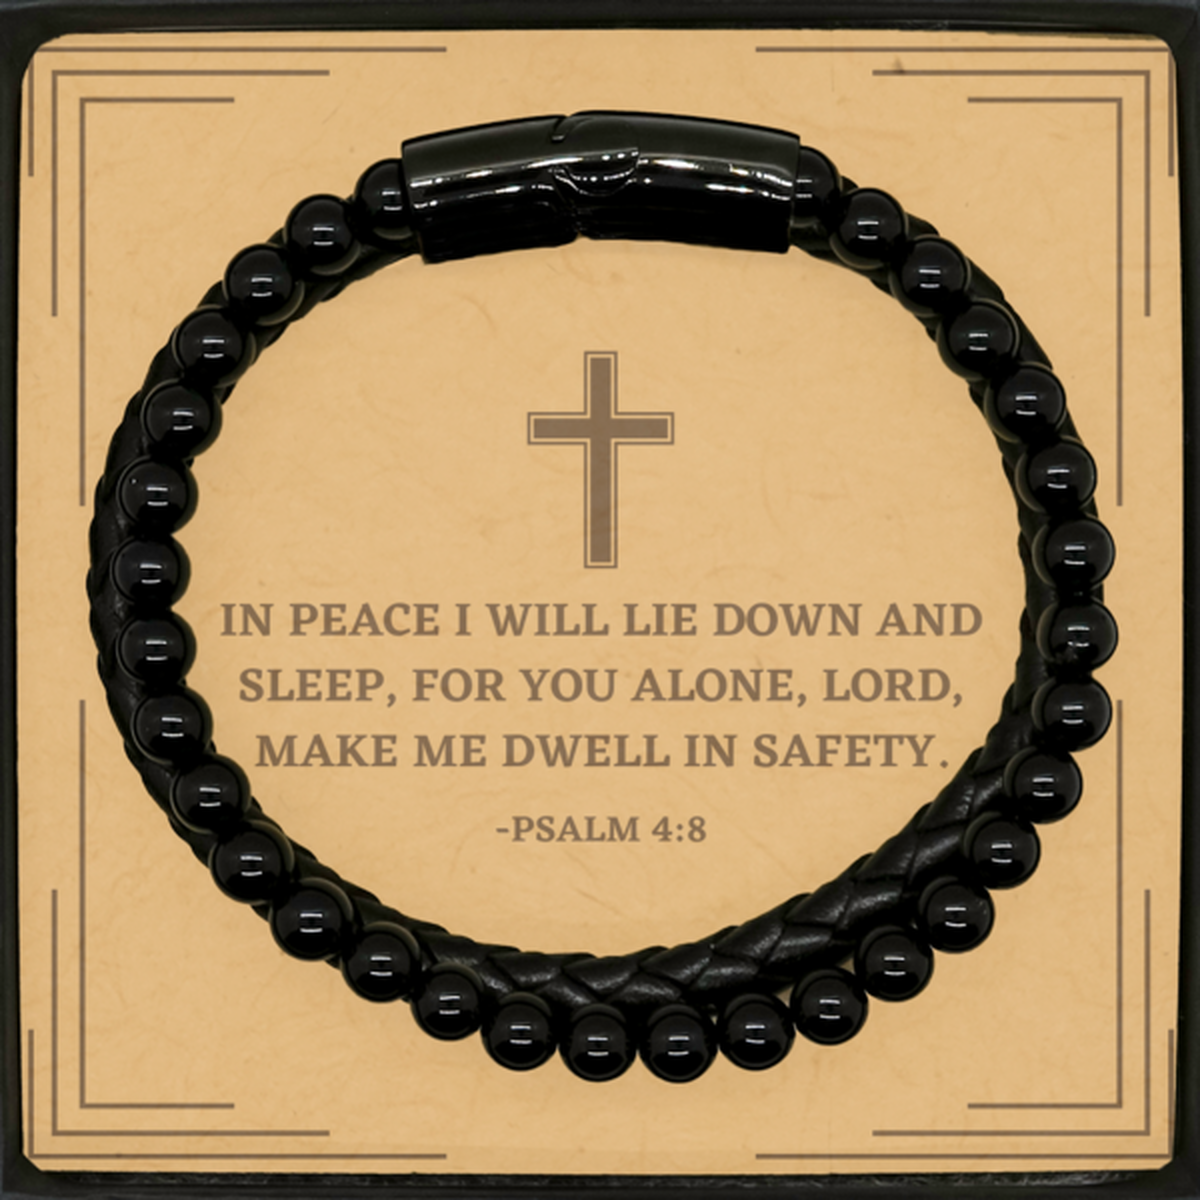 Baptism Gifts For Teenage Boys Girls, Christian Bible Verse Stone Leather Bracelet, In peace I will lie down and sleep, Confirmation Gifts, Bible Verse Card for Son, Godson, Grandson